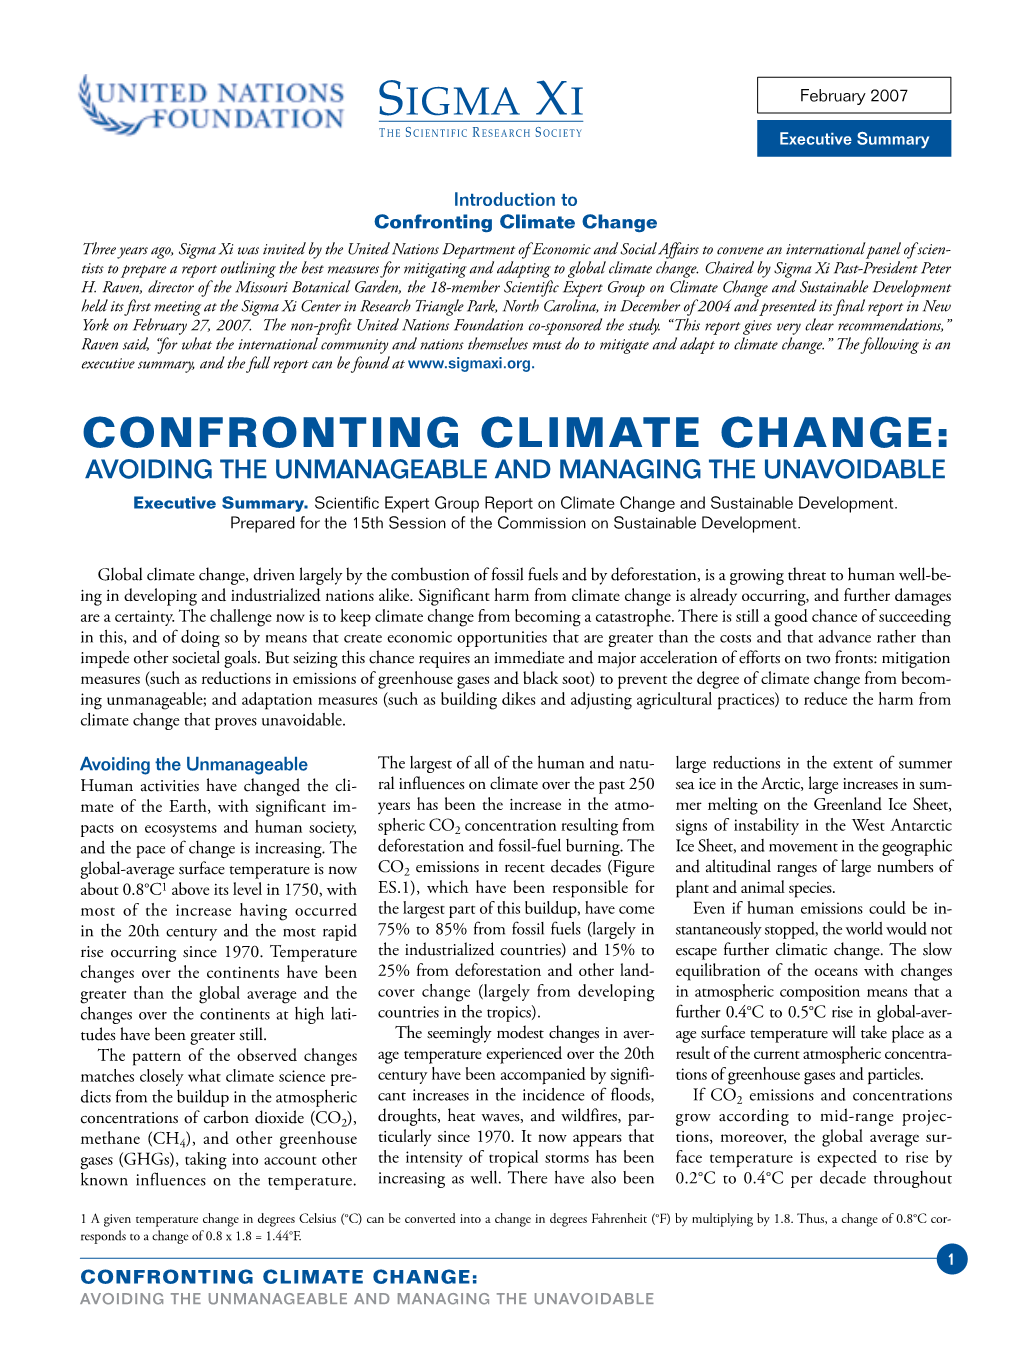 CONFRONTING CLIMATE CHANGE: AVOIDING the UNMANAGEABLE and MANAGING the UNAVOIDABLE Executive Summary